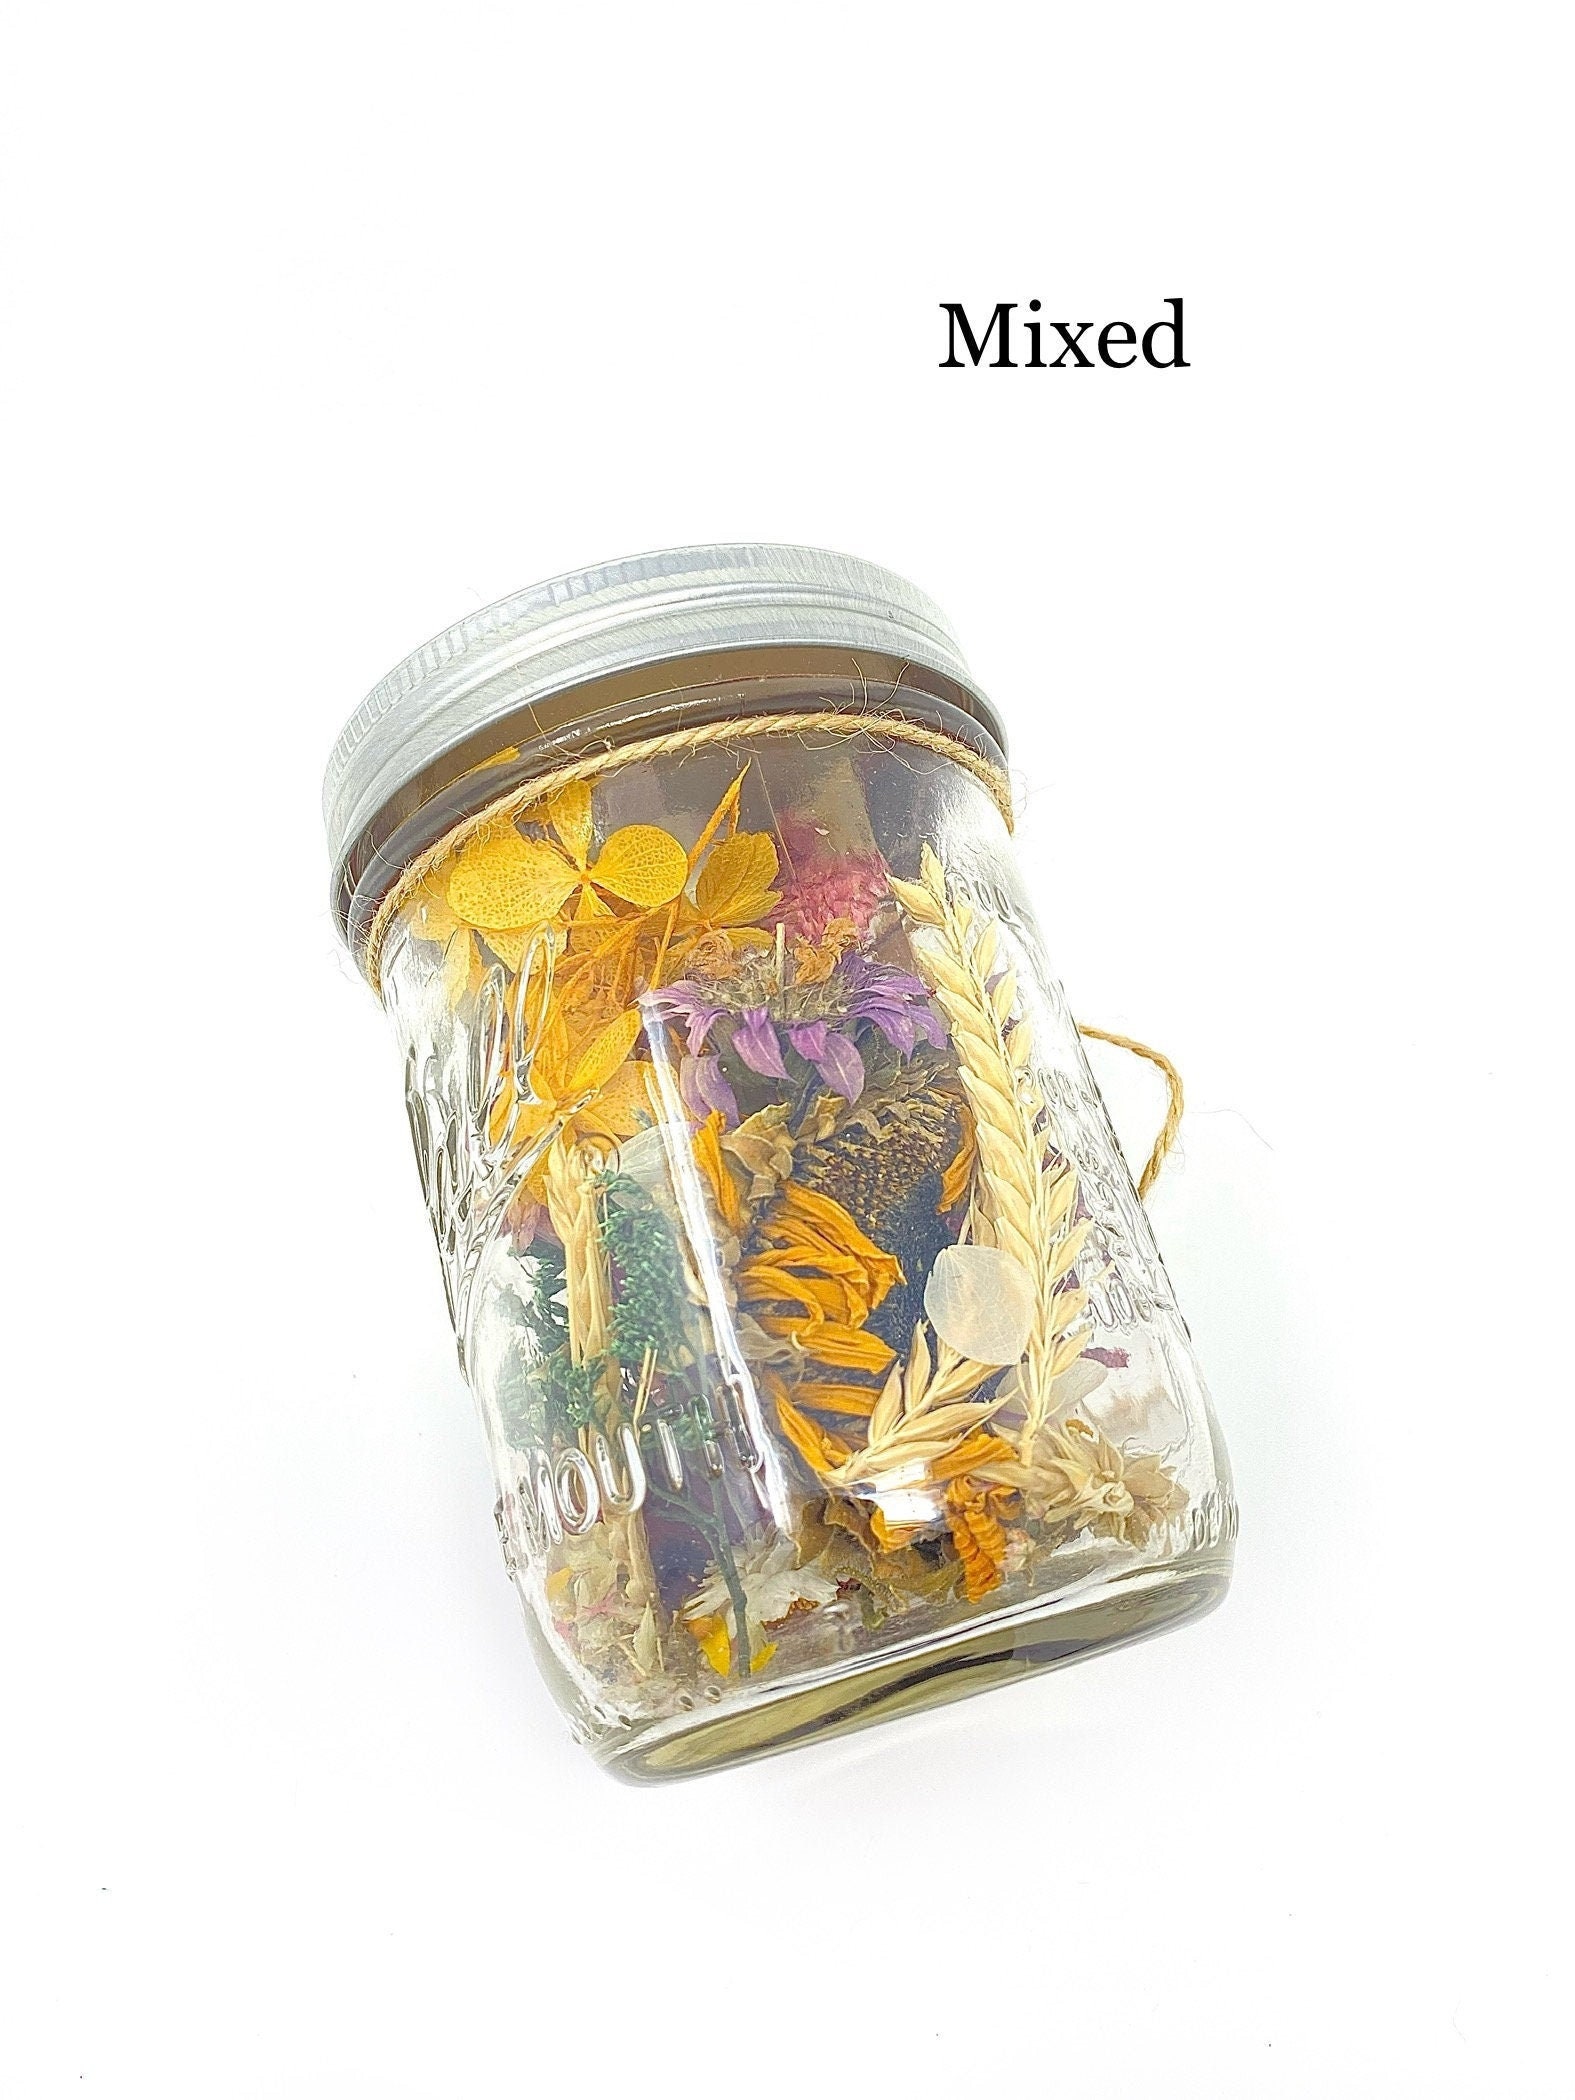 Glass Jars Edible Dried Flowers Natural Stock Photo 2217065019